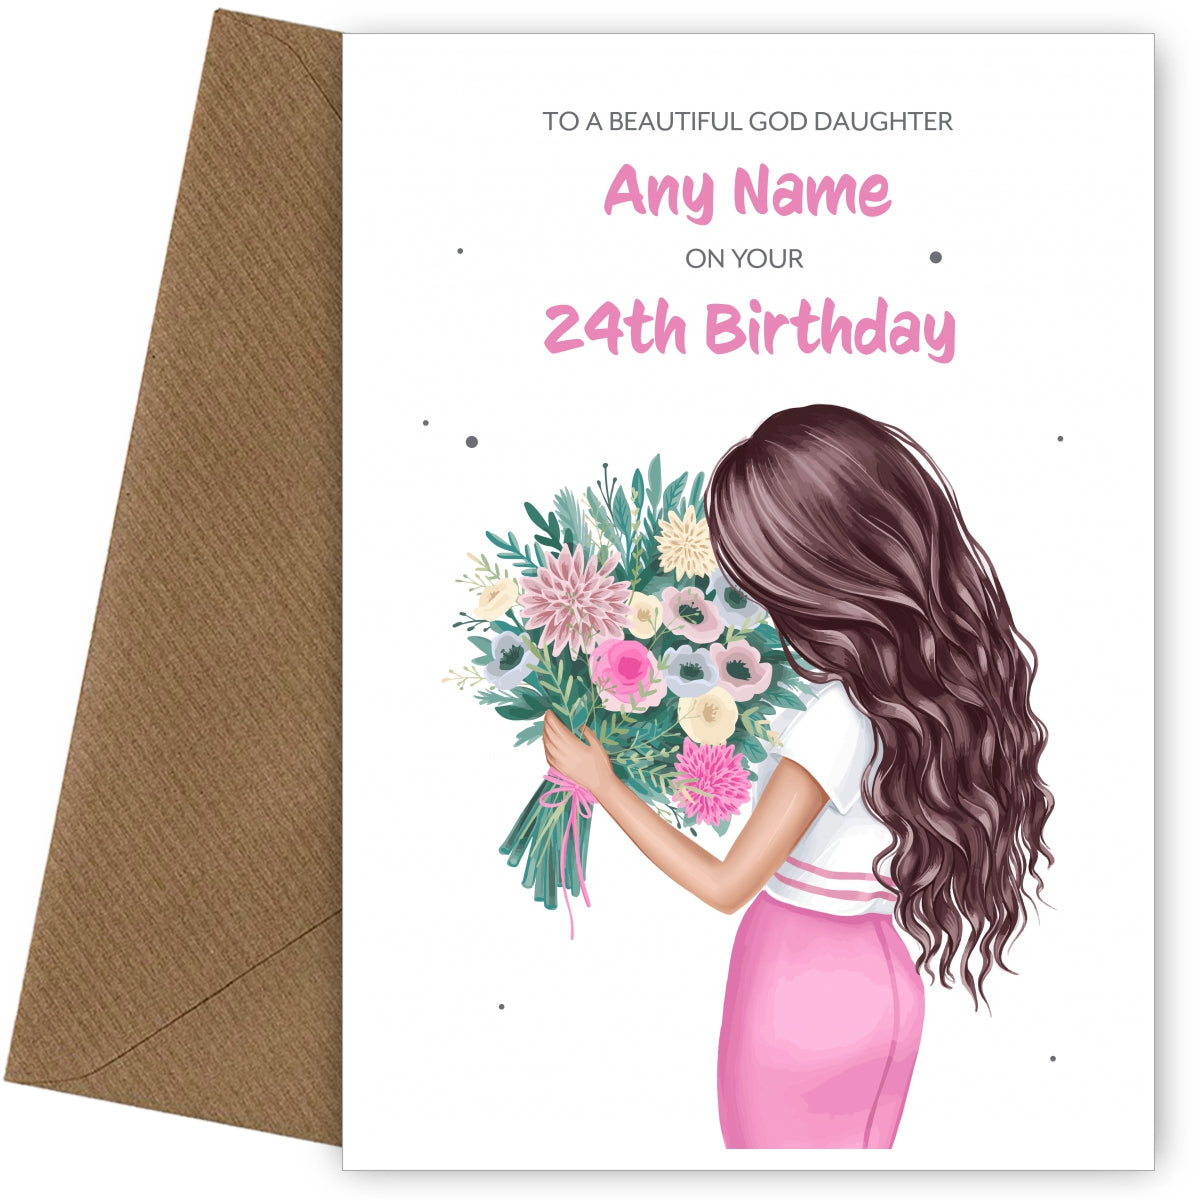 24th Birthday Card for God Daughter - Beautiful Brunette